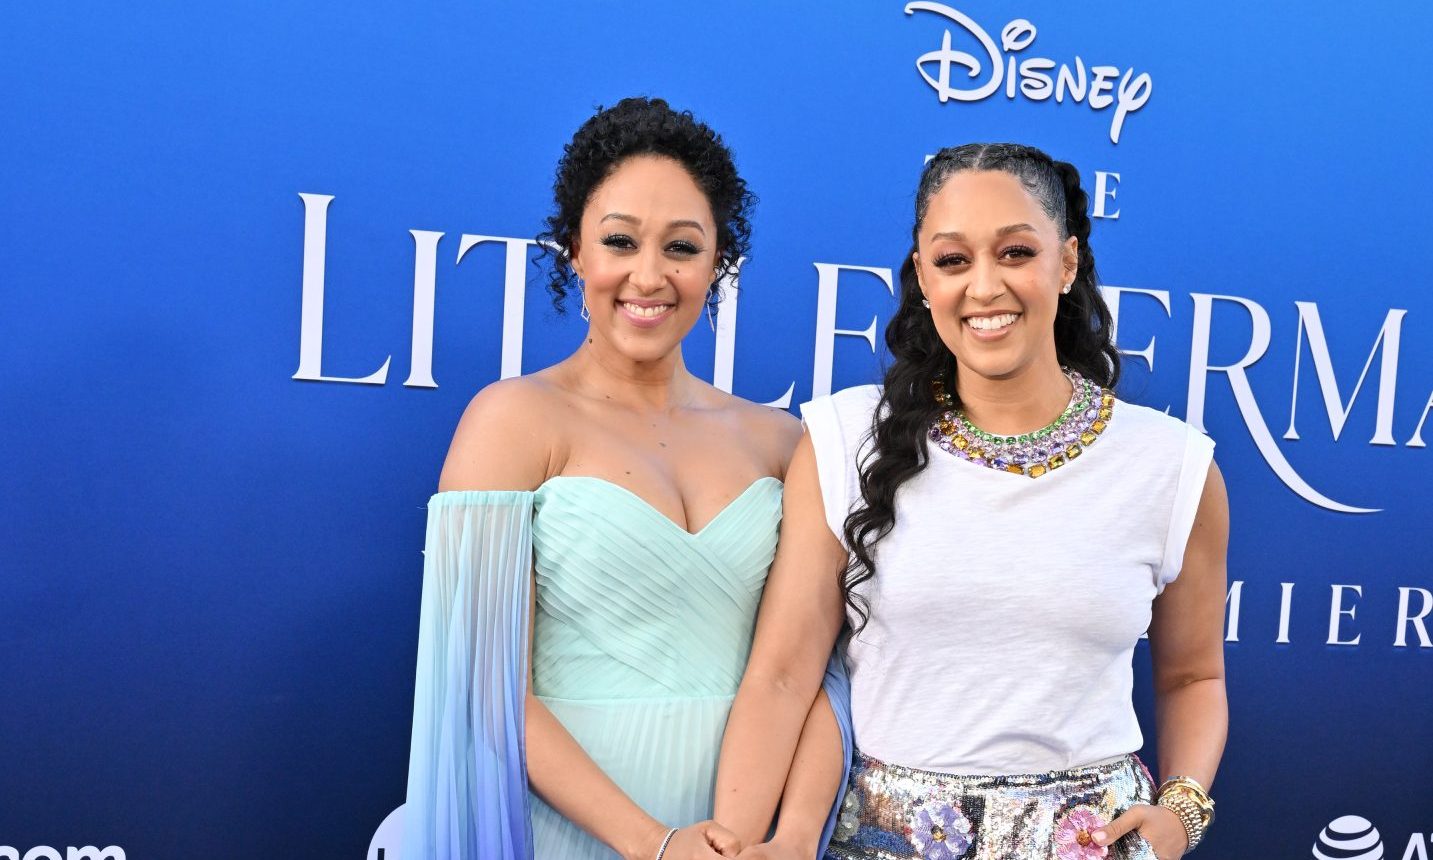 Watch Tamera Mowry Rank Songs That Mention Her & Tia Mowry